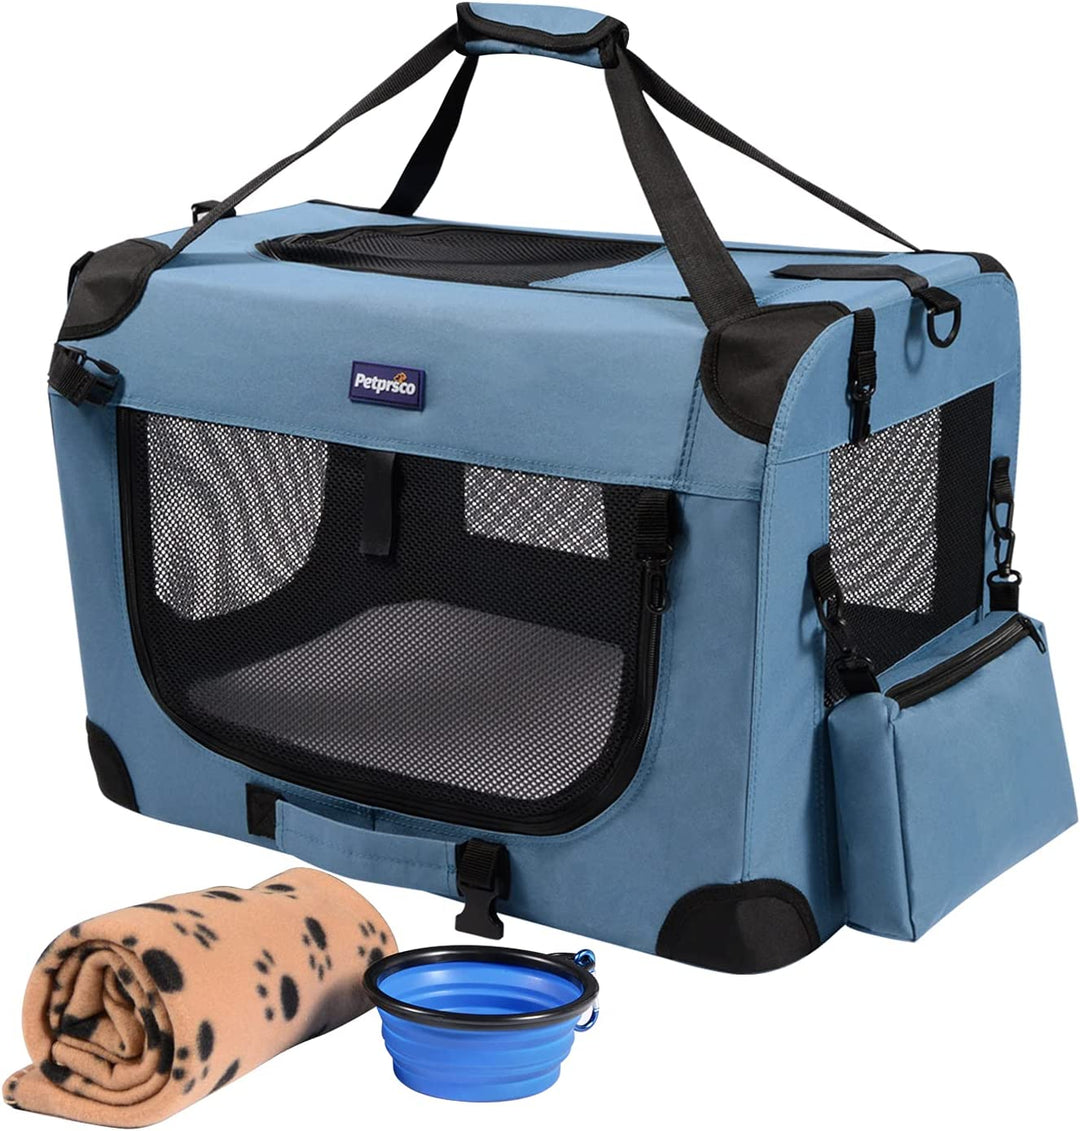 Portable Collapsible Dog Crate, Travel Dog Crate 24X17X17 with Soft Warm Blanket and Foldable Bowl for Large Cats & Small Dogs Indoor and Outdoor